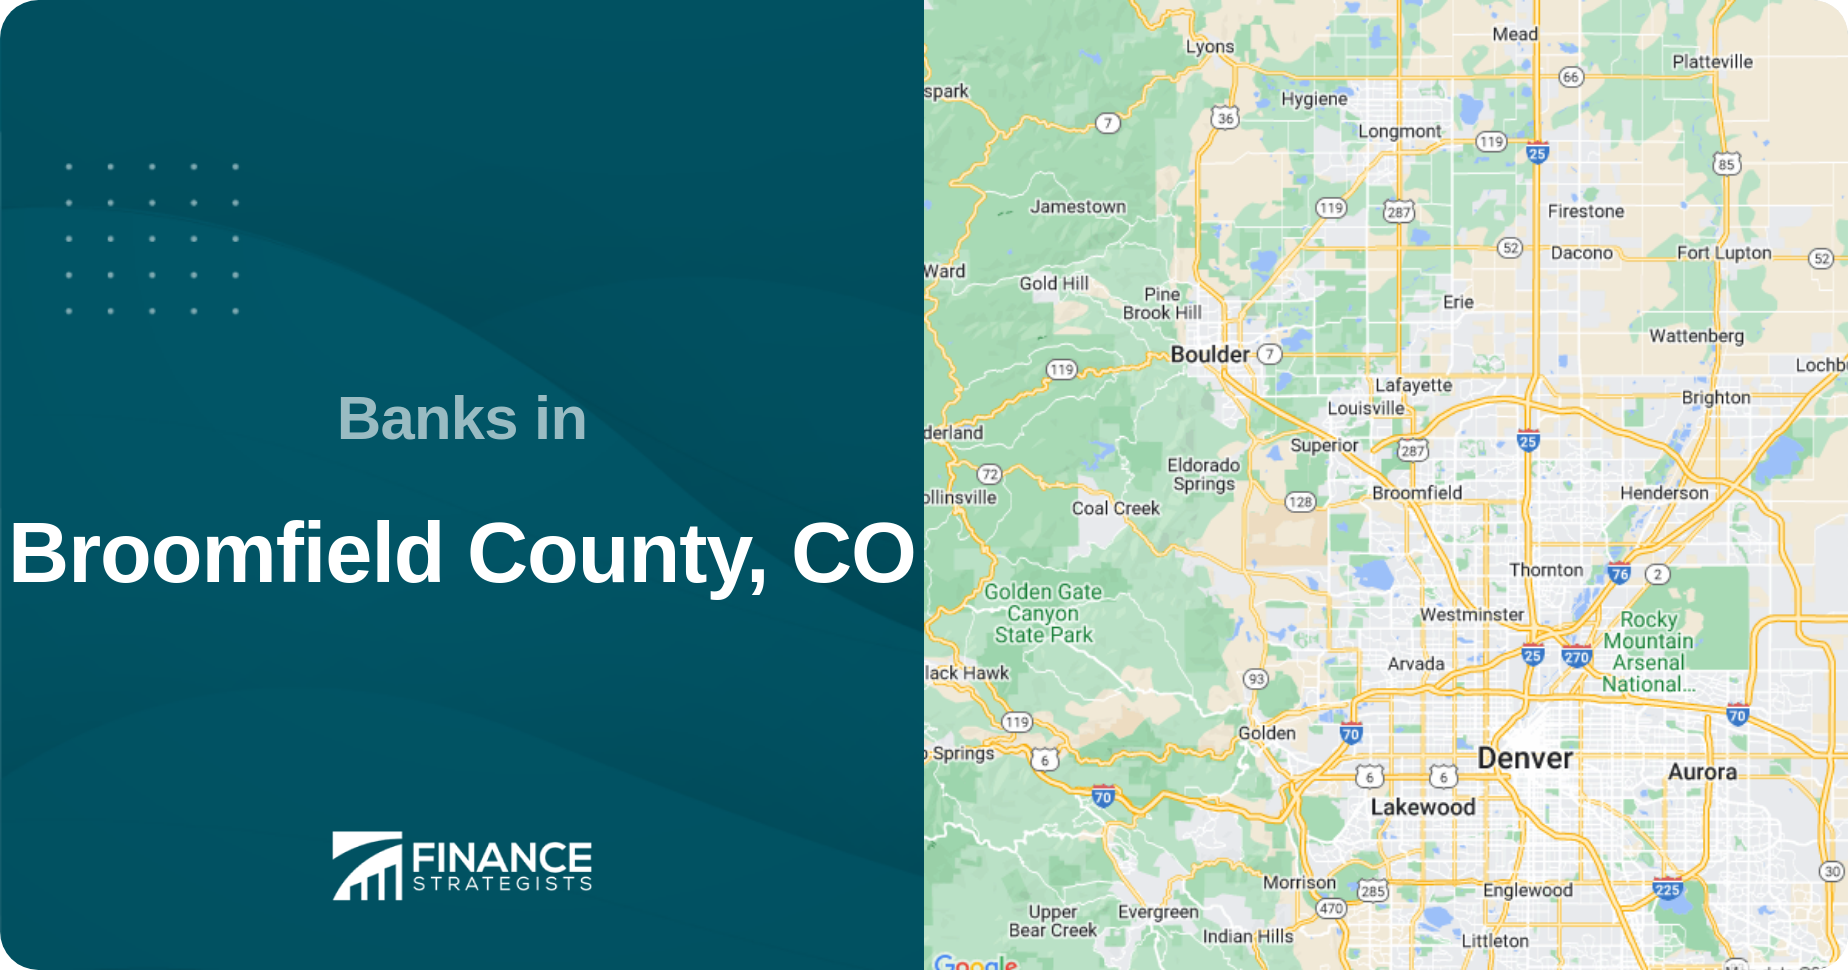 Banks in Broomfield County, CO